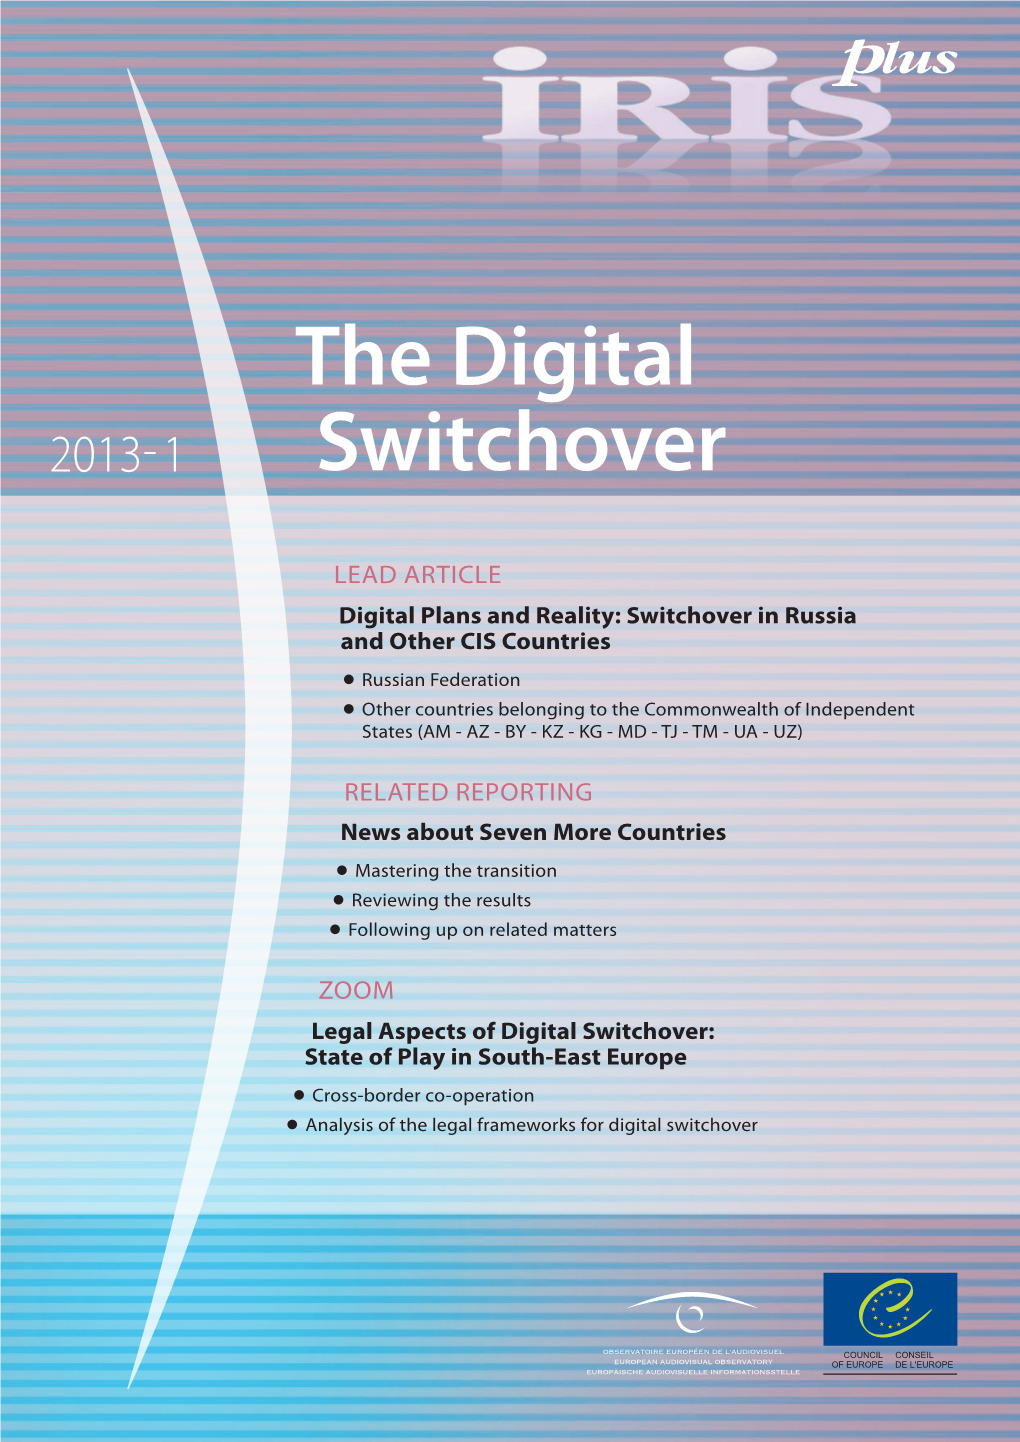 The Digital Switchover